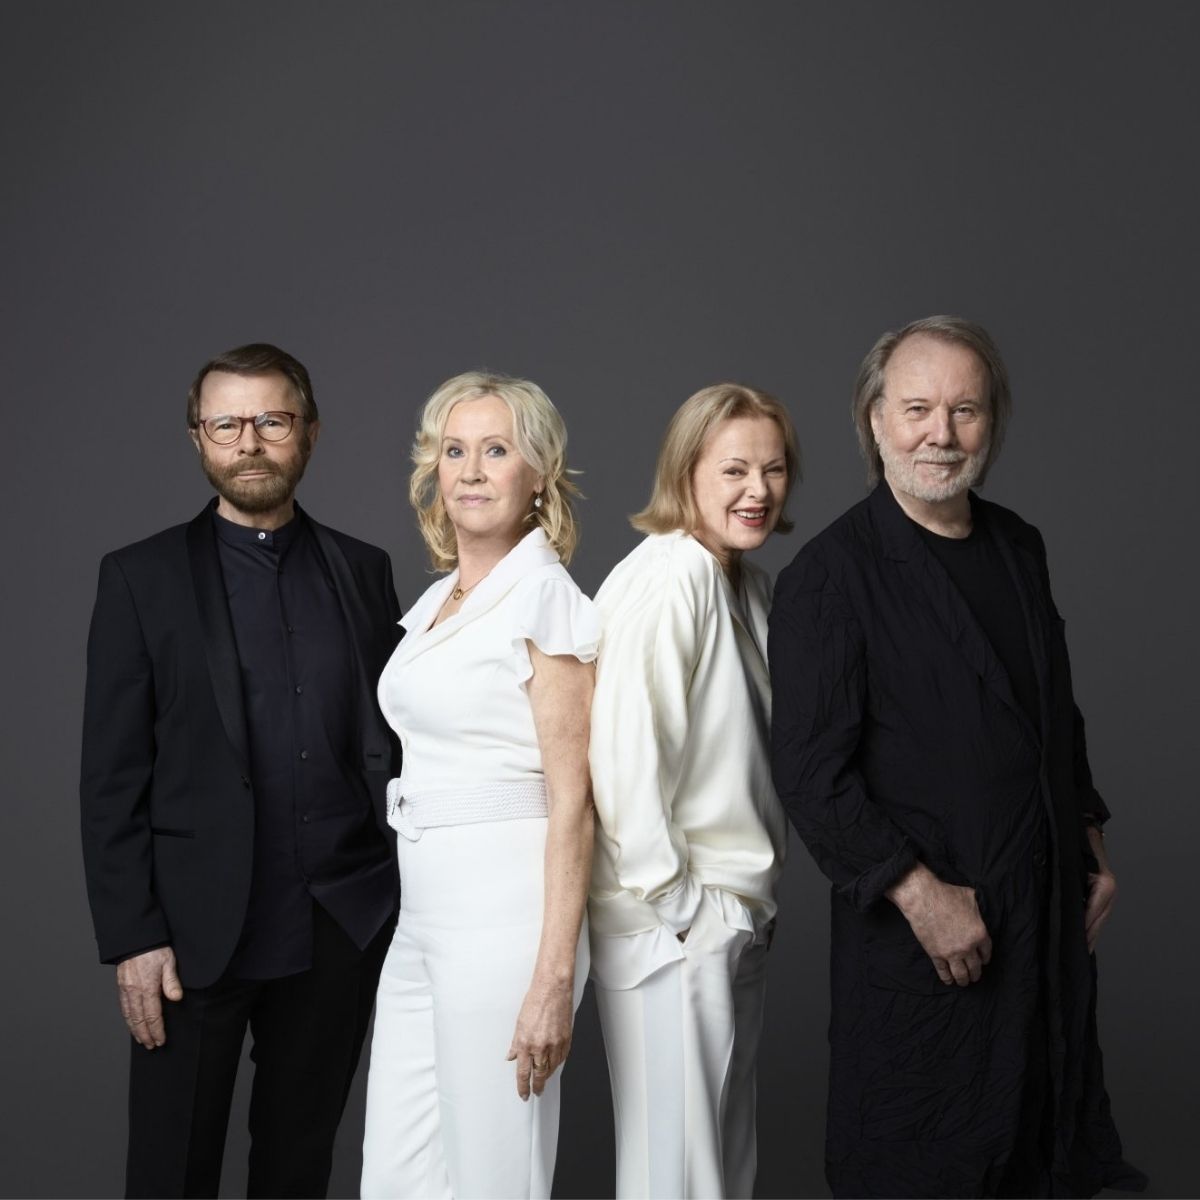 The ABBA group today